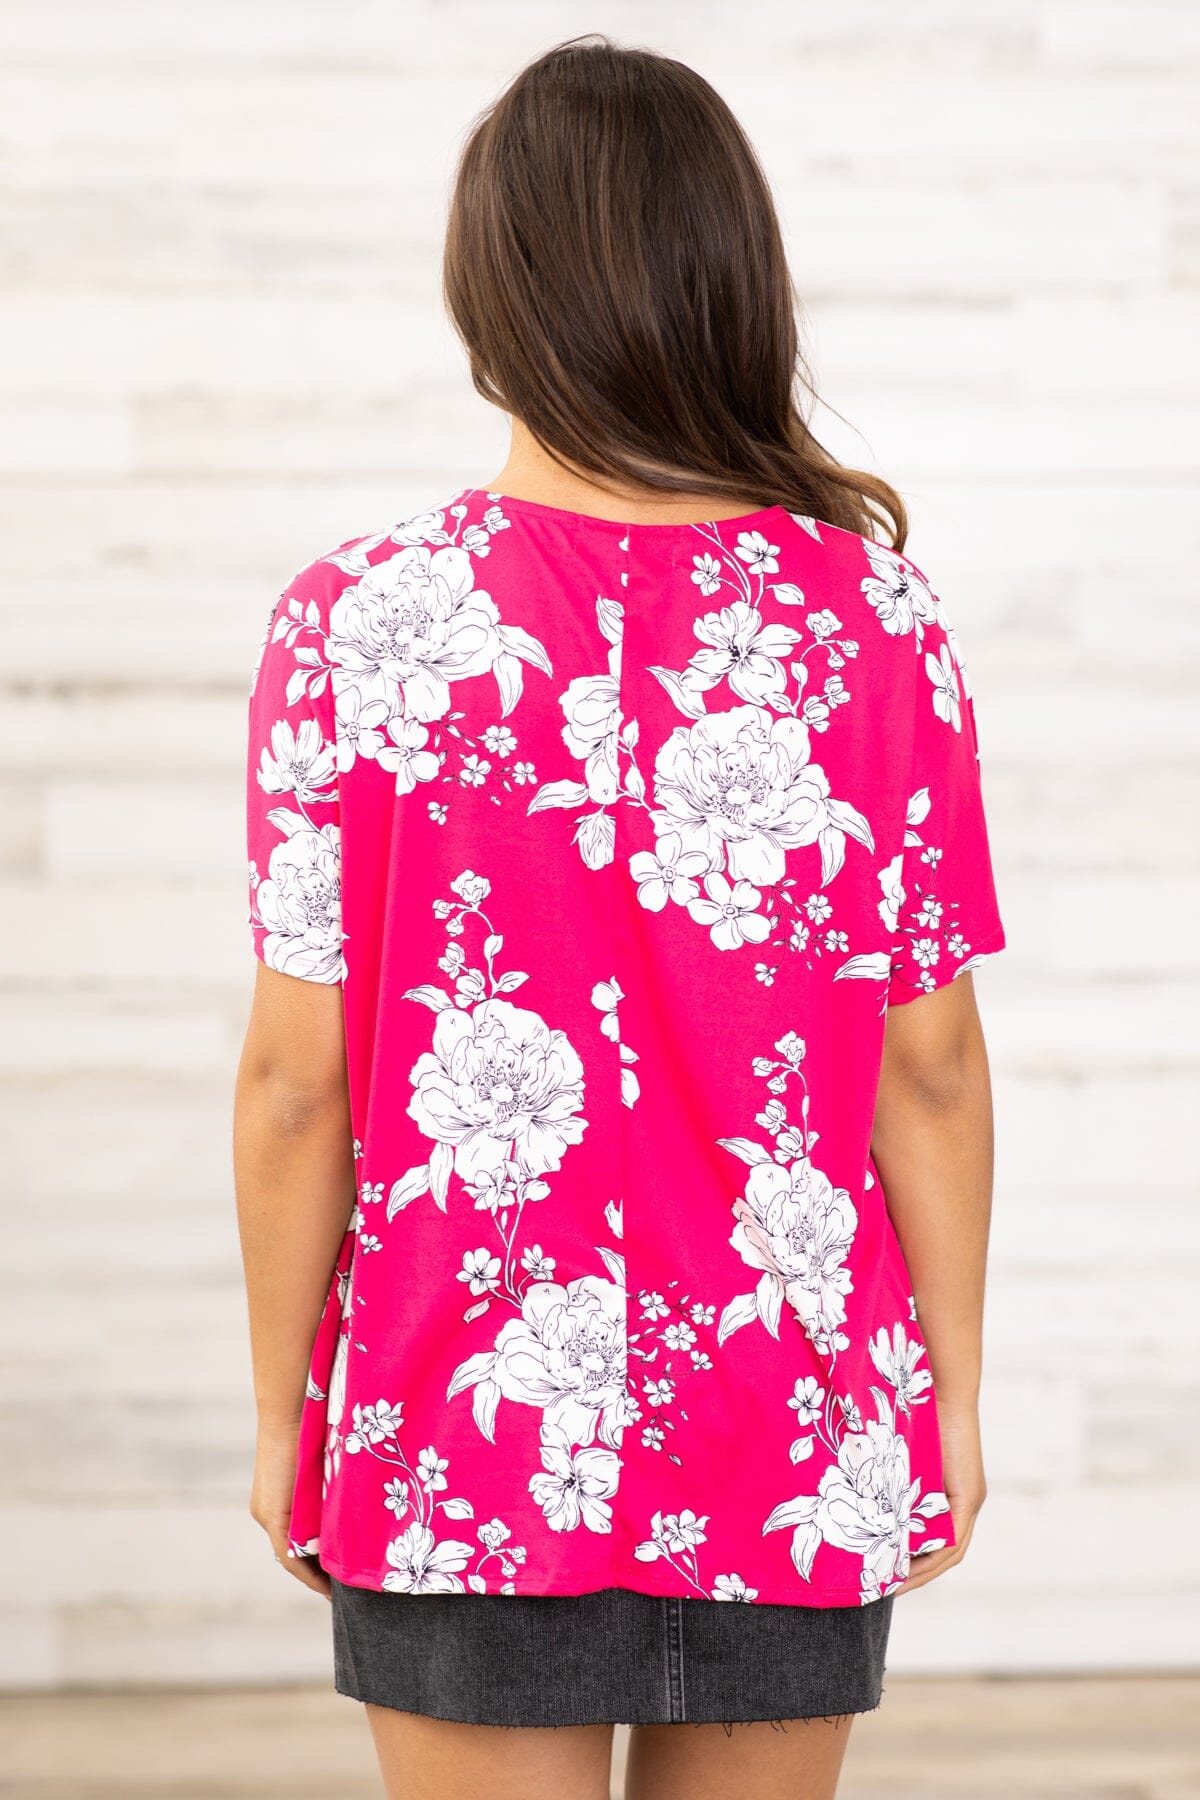 Hot Pink and White Floral Print V-Neck Top - Filly Flair